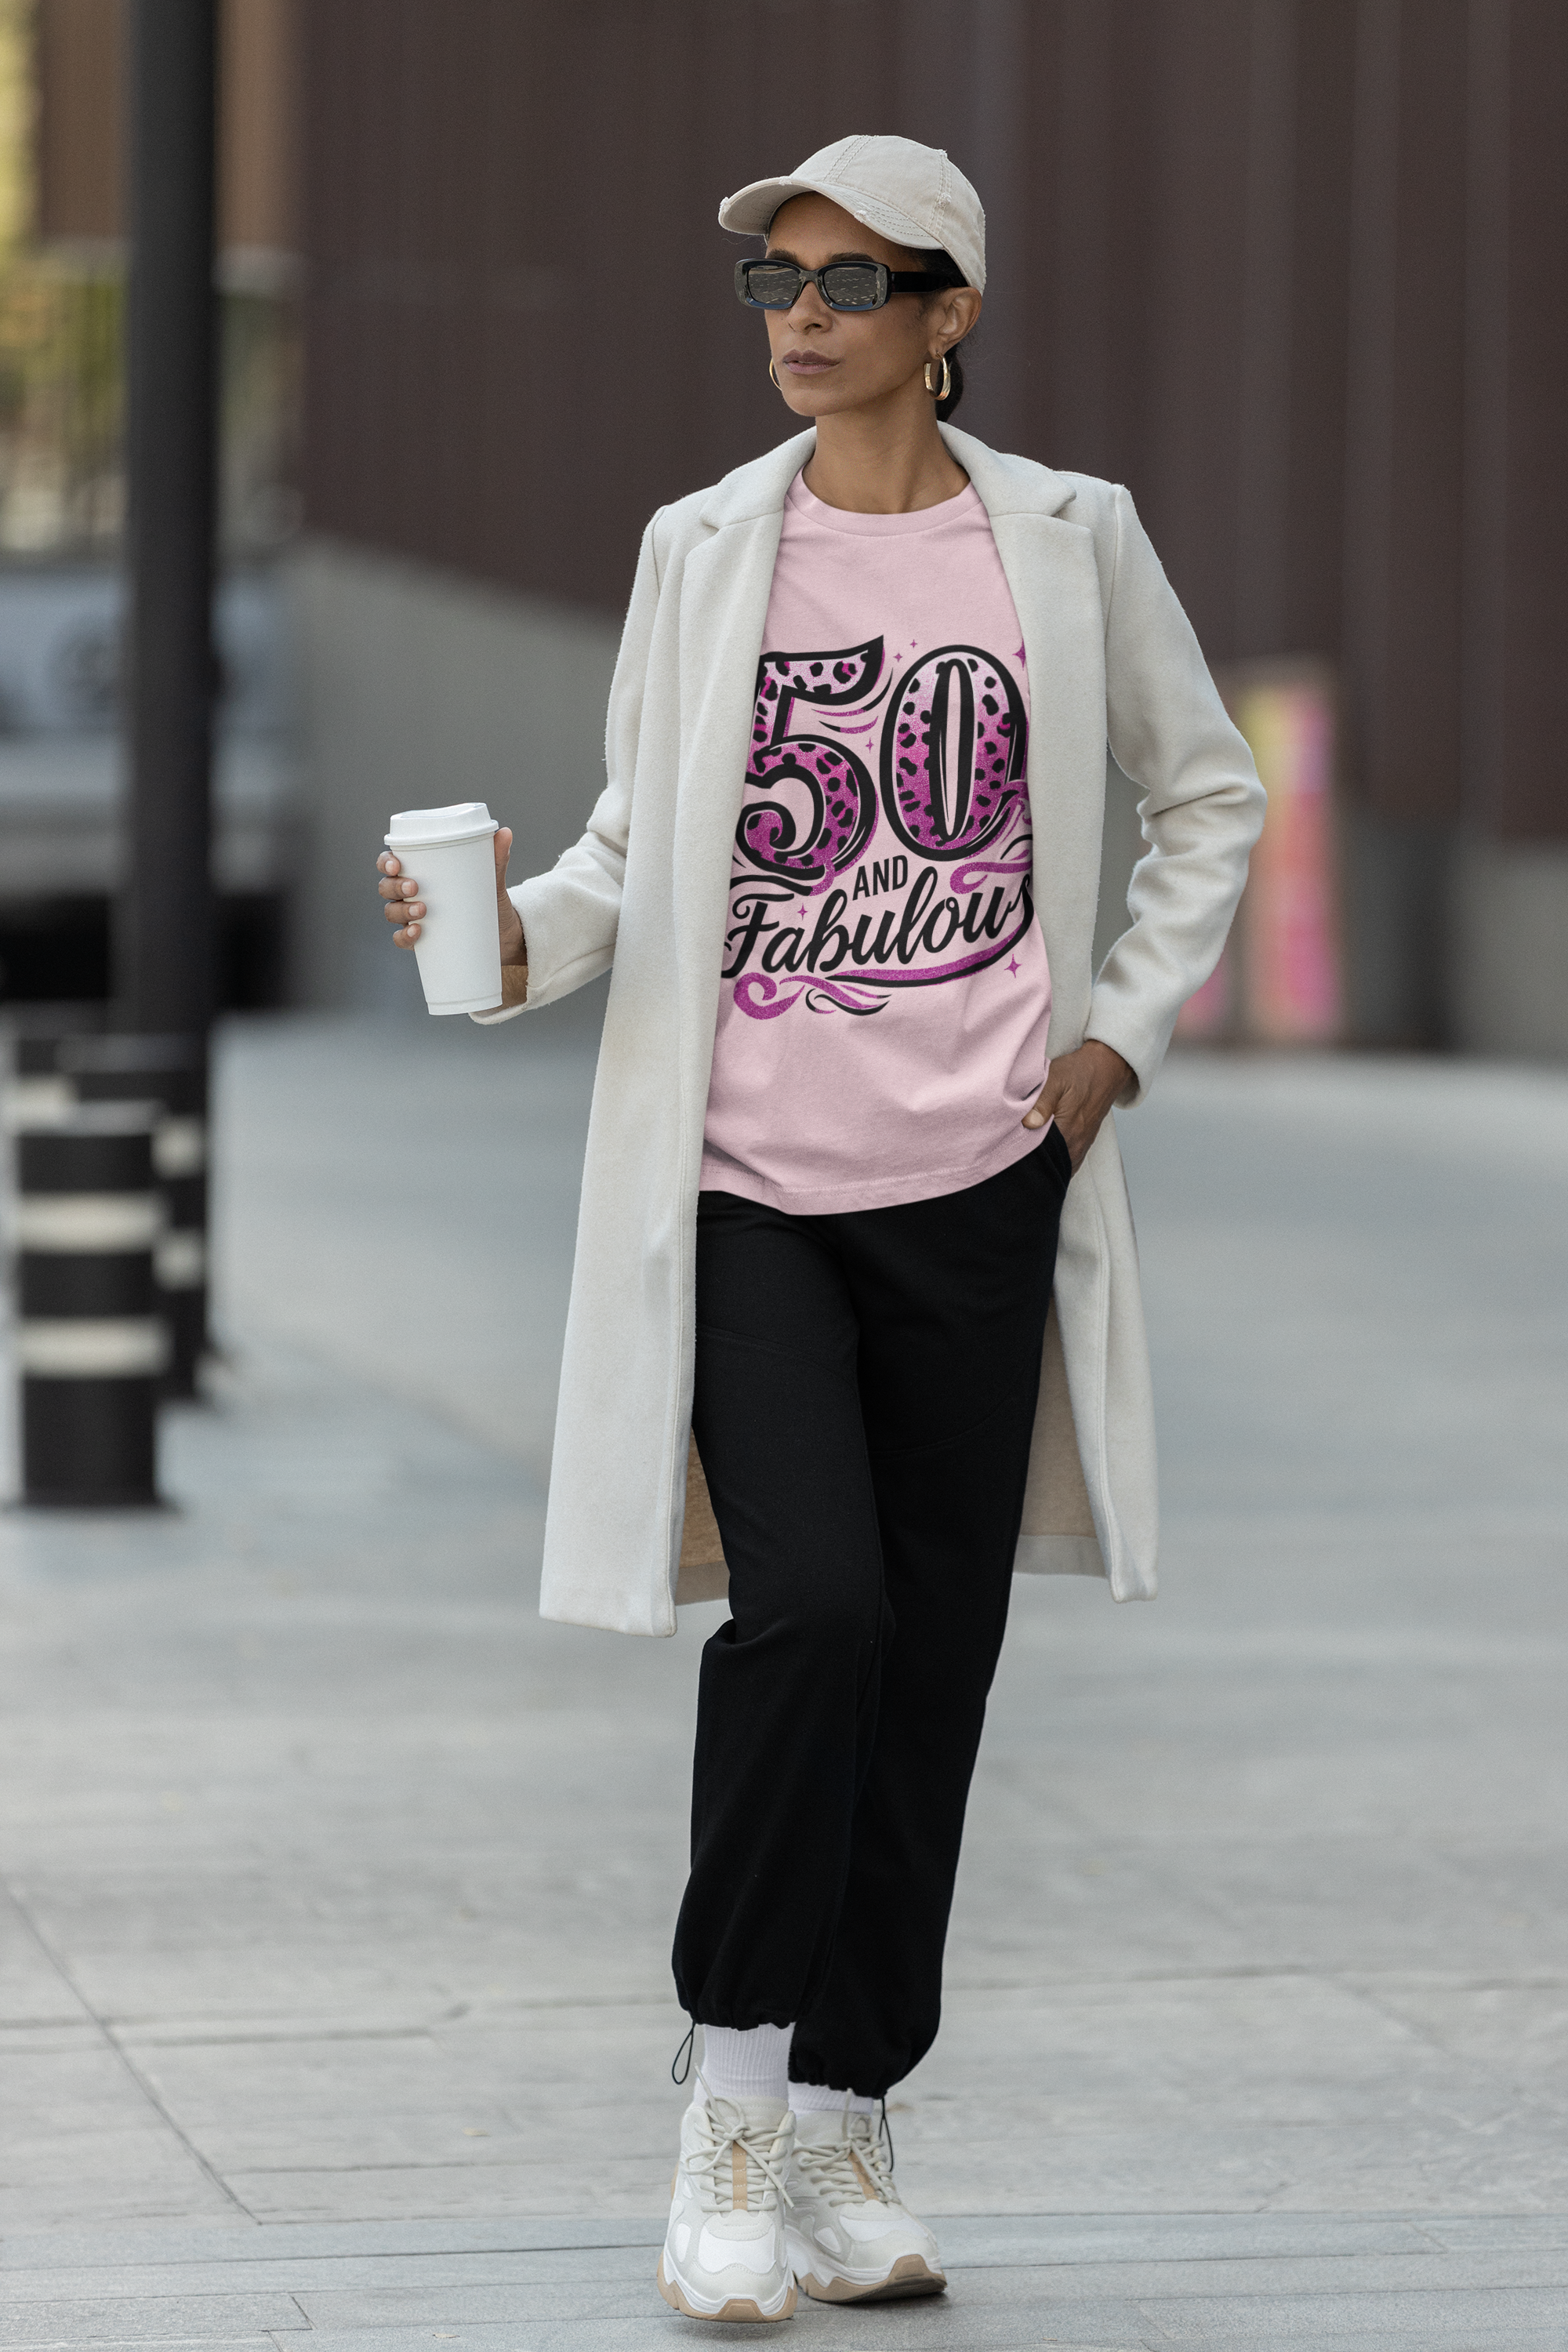 Image shows a t shirt transfer that says 50 and fabulous